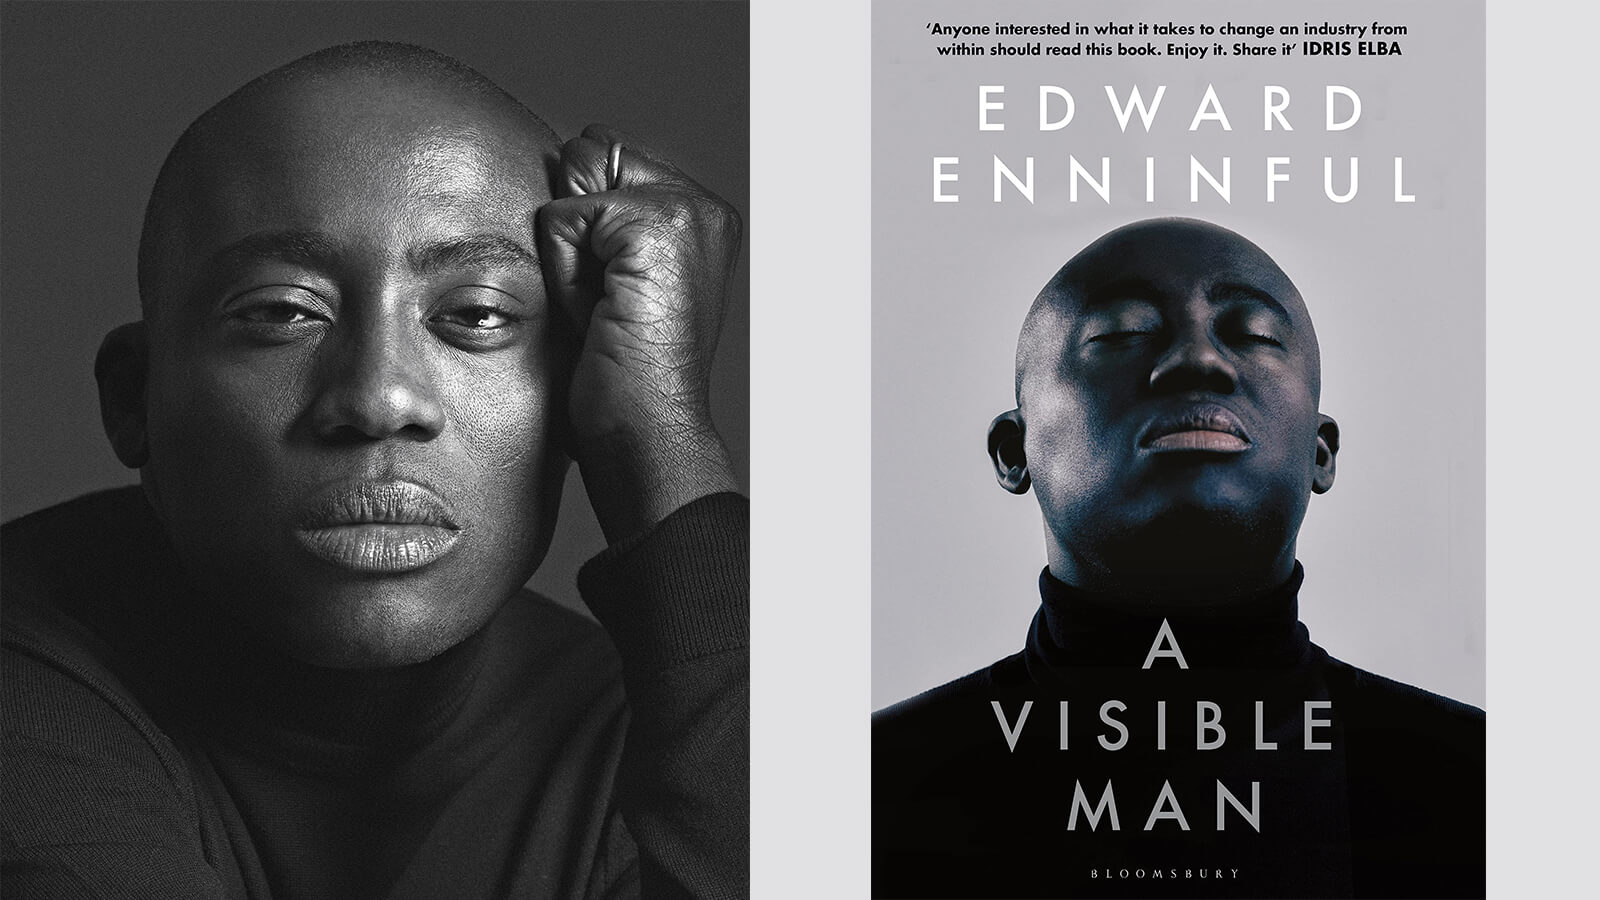 Portrait of British Vogue editor-in-chief Edward Enninful and his book cover